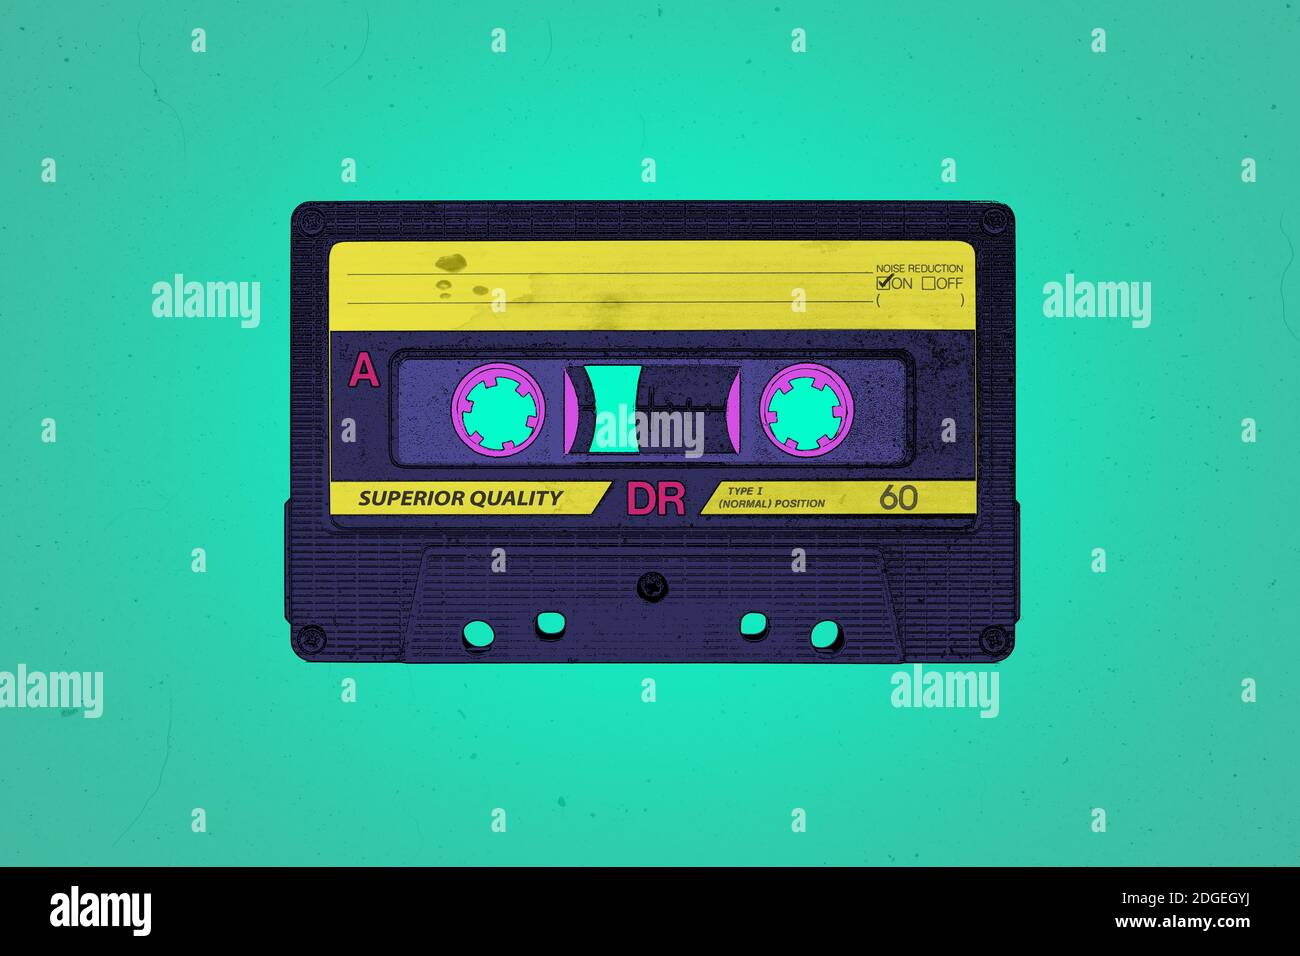 A retro 1990's or 1980's themed vibrant neon synthwave style audio cassette illustration background with copy space Stock Photo